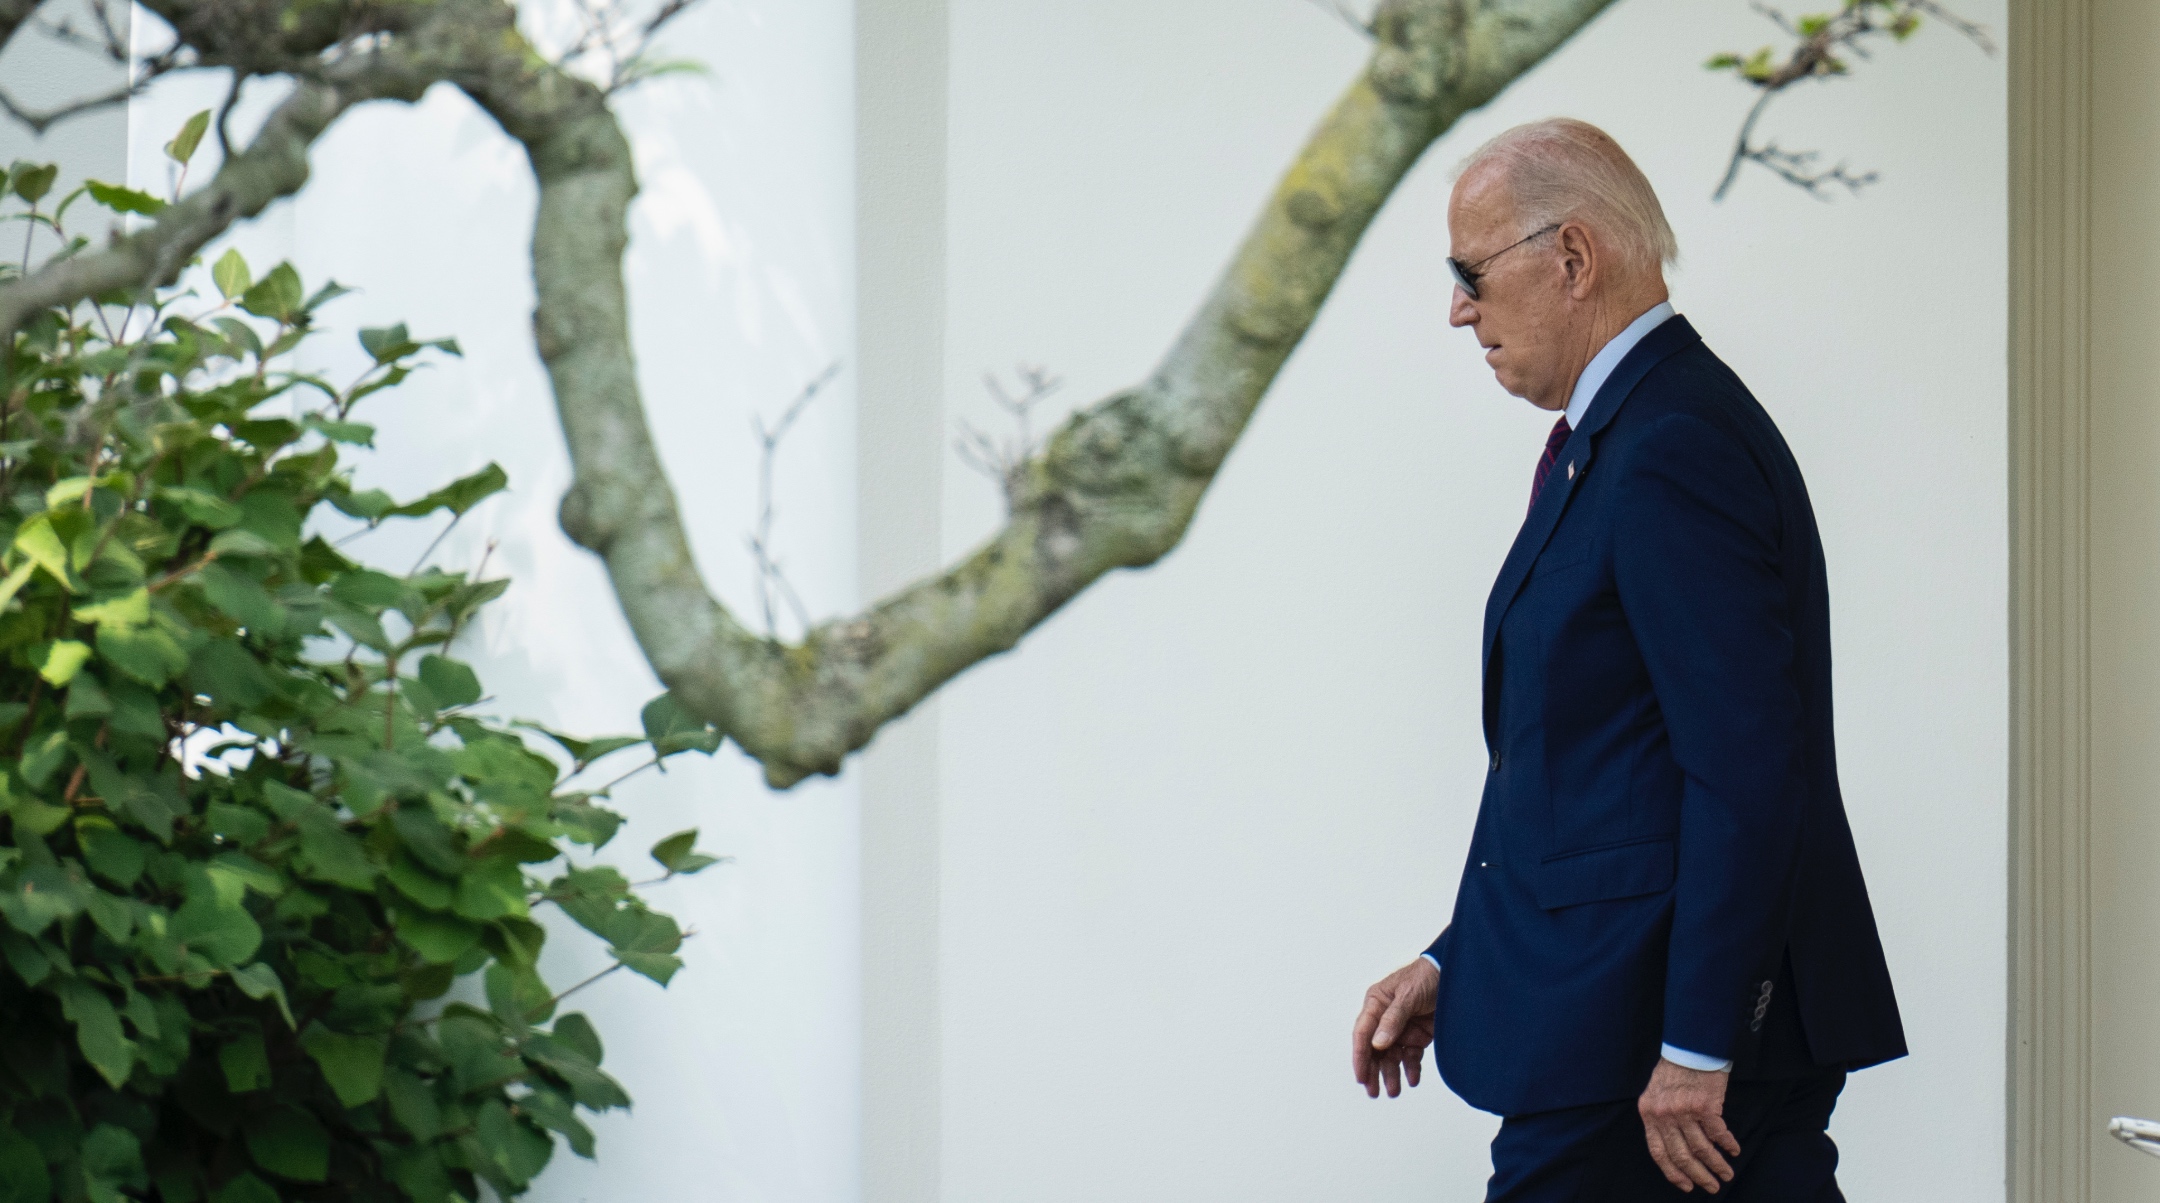 U.S. President Joe Biden departs the Oval Office and walks to Marine One on the South Lawn of the White House, July 28, 2023. (Drew Angerer/Getty Images)